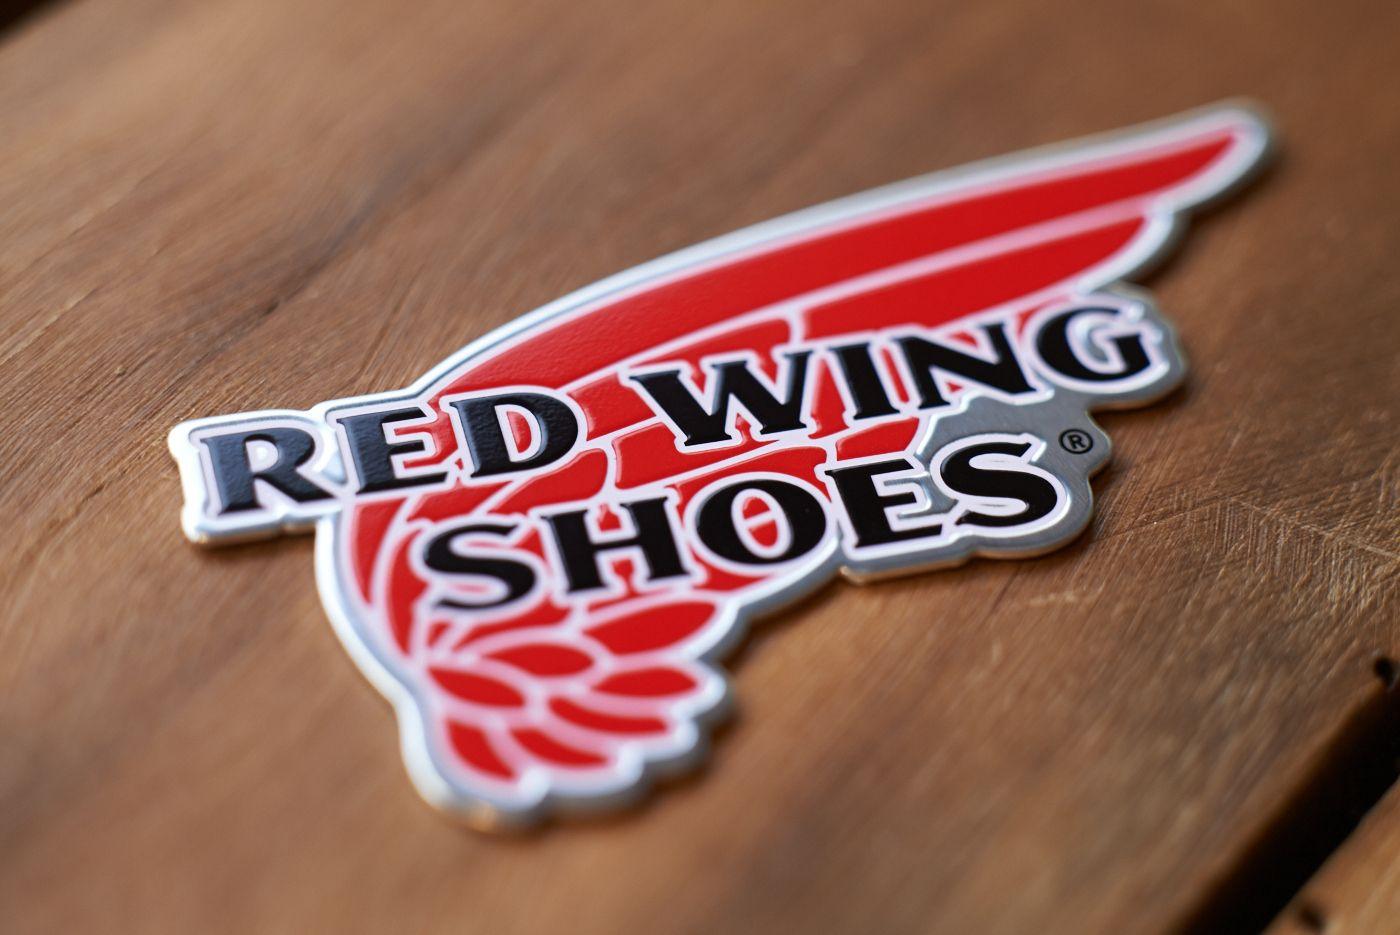 Red Wing Shoes Logo - Red Wing Shoes kaufen - RIDERS ROOM Hamburg